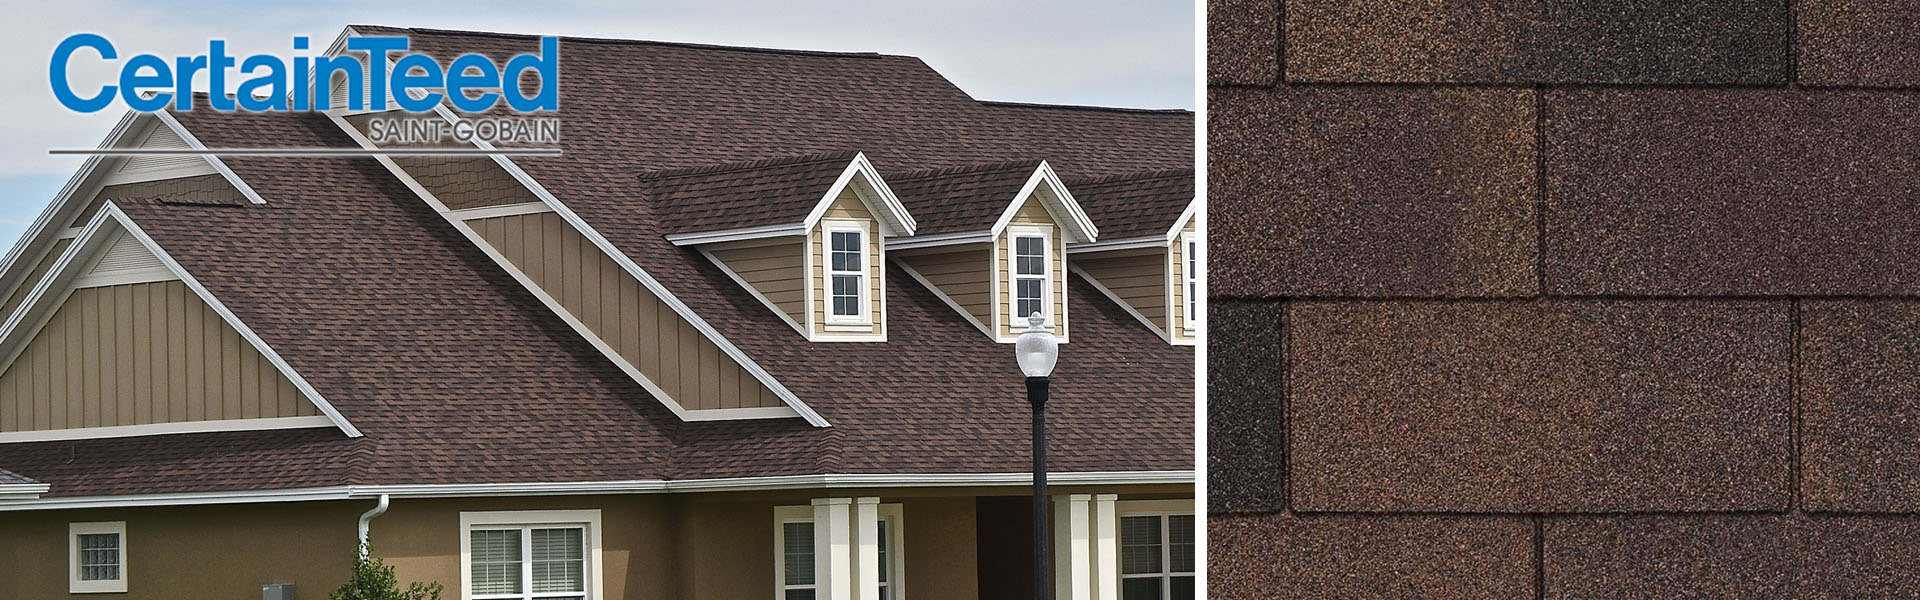 McPride Roofing Images